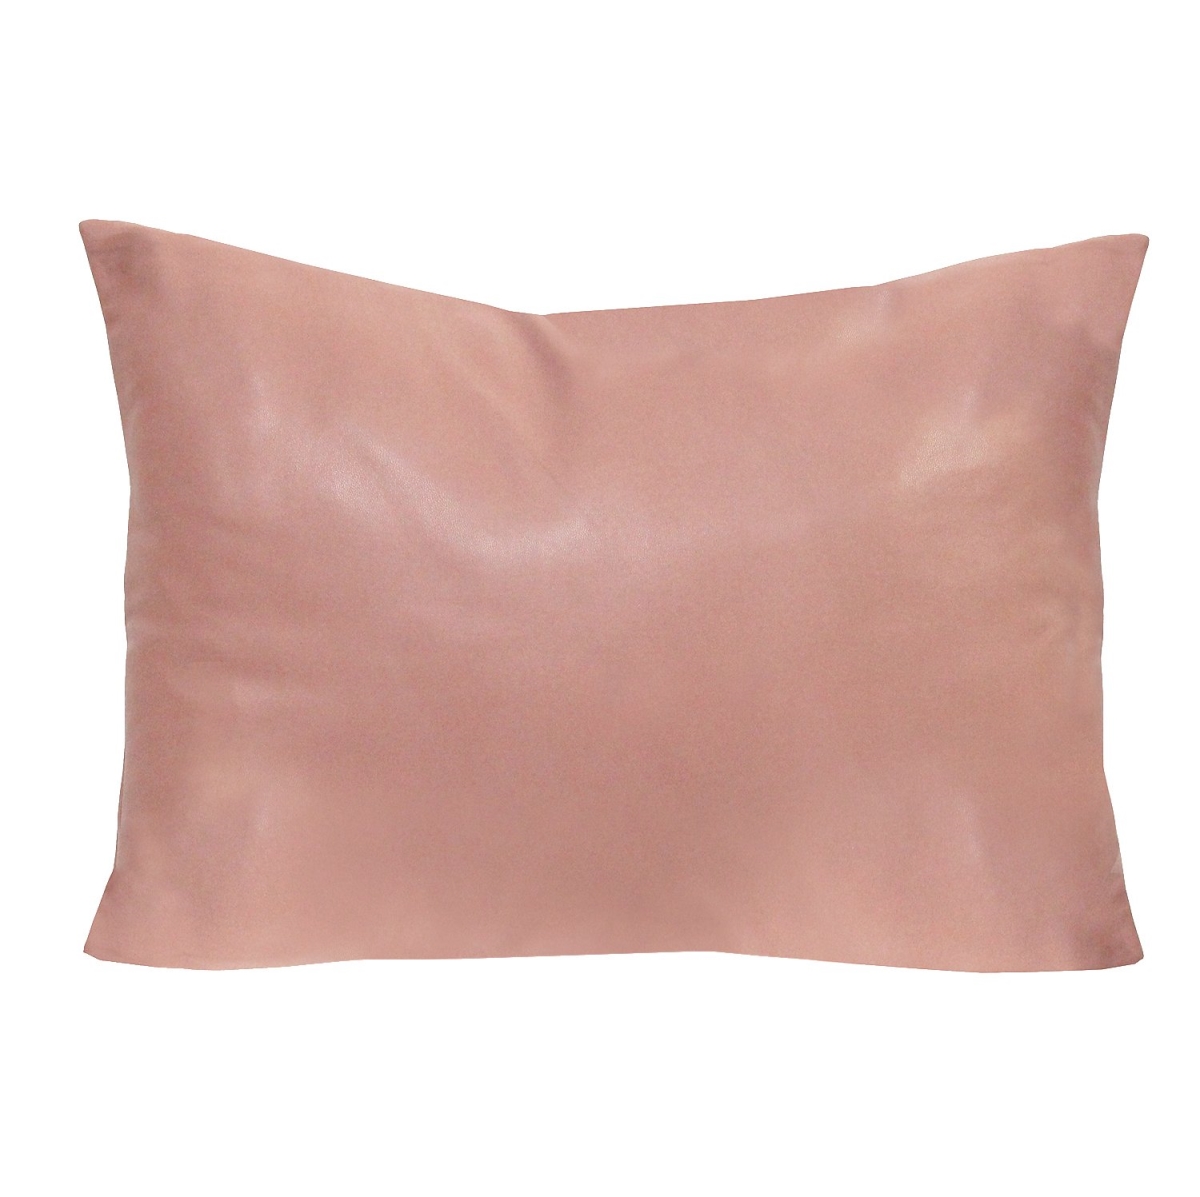 Home Roots Beddings 331471 Faux Leather Lumbar Pillow, Pink